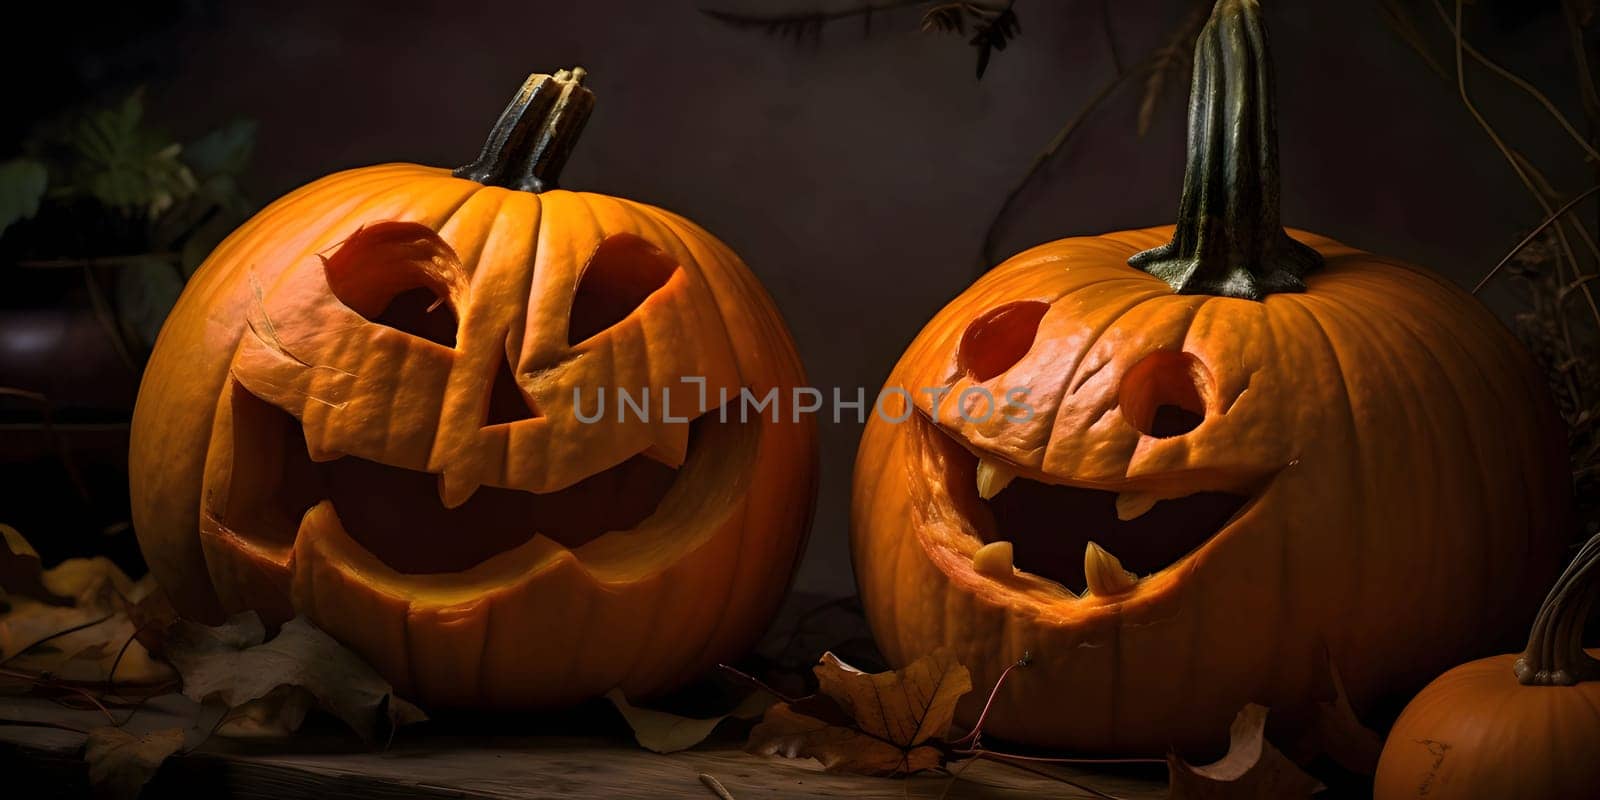 Two dark pumpkins, leaves all around, dark background, a Halloween image. Atmosphere of darkness and fear.